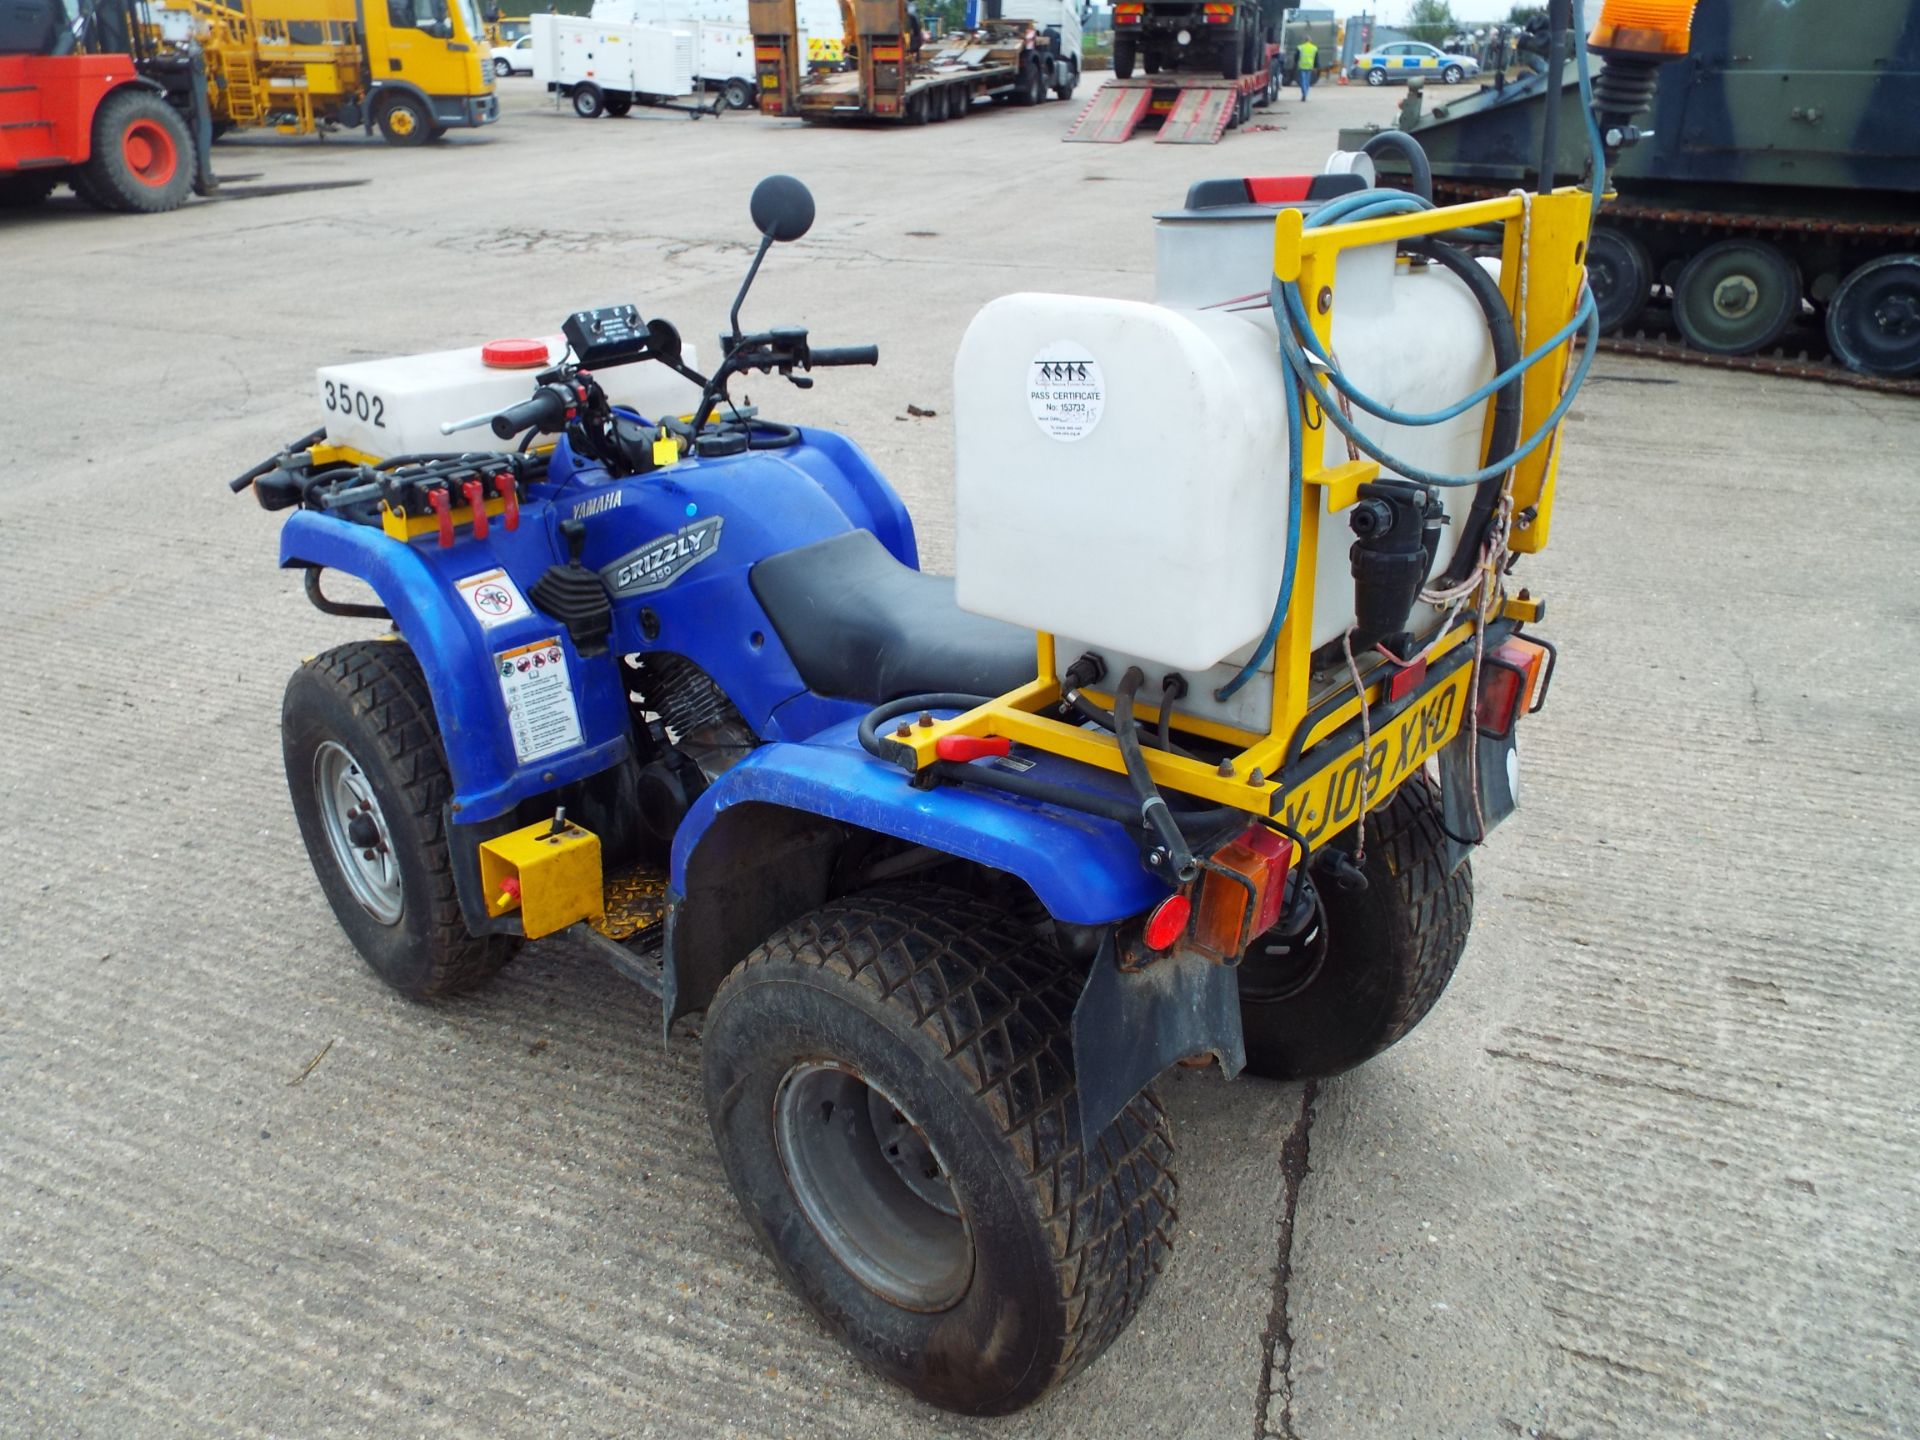 2008 Yamaha Grizzly 350 Ultramatic Quad Bike fitted with Vale Front/Rear Spraying Equipment - Bild 5 aus 26